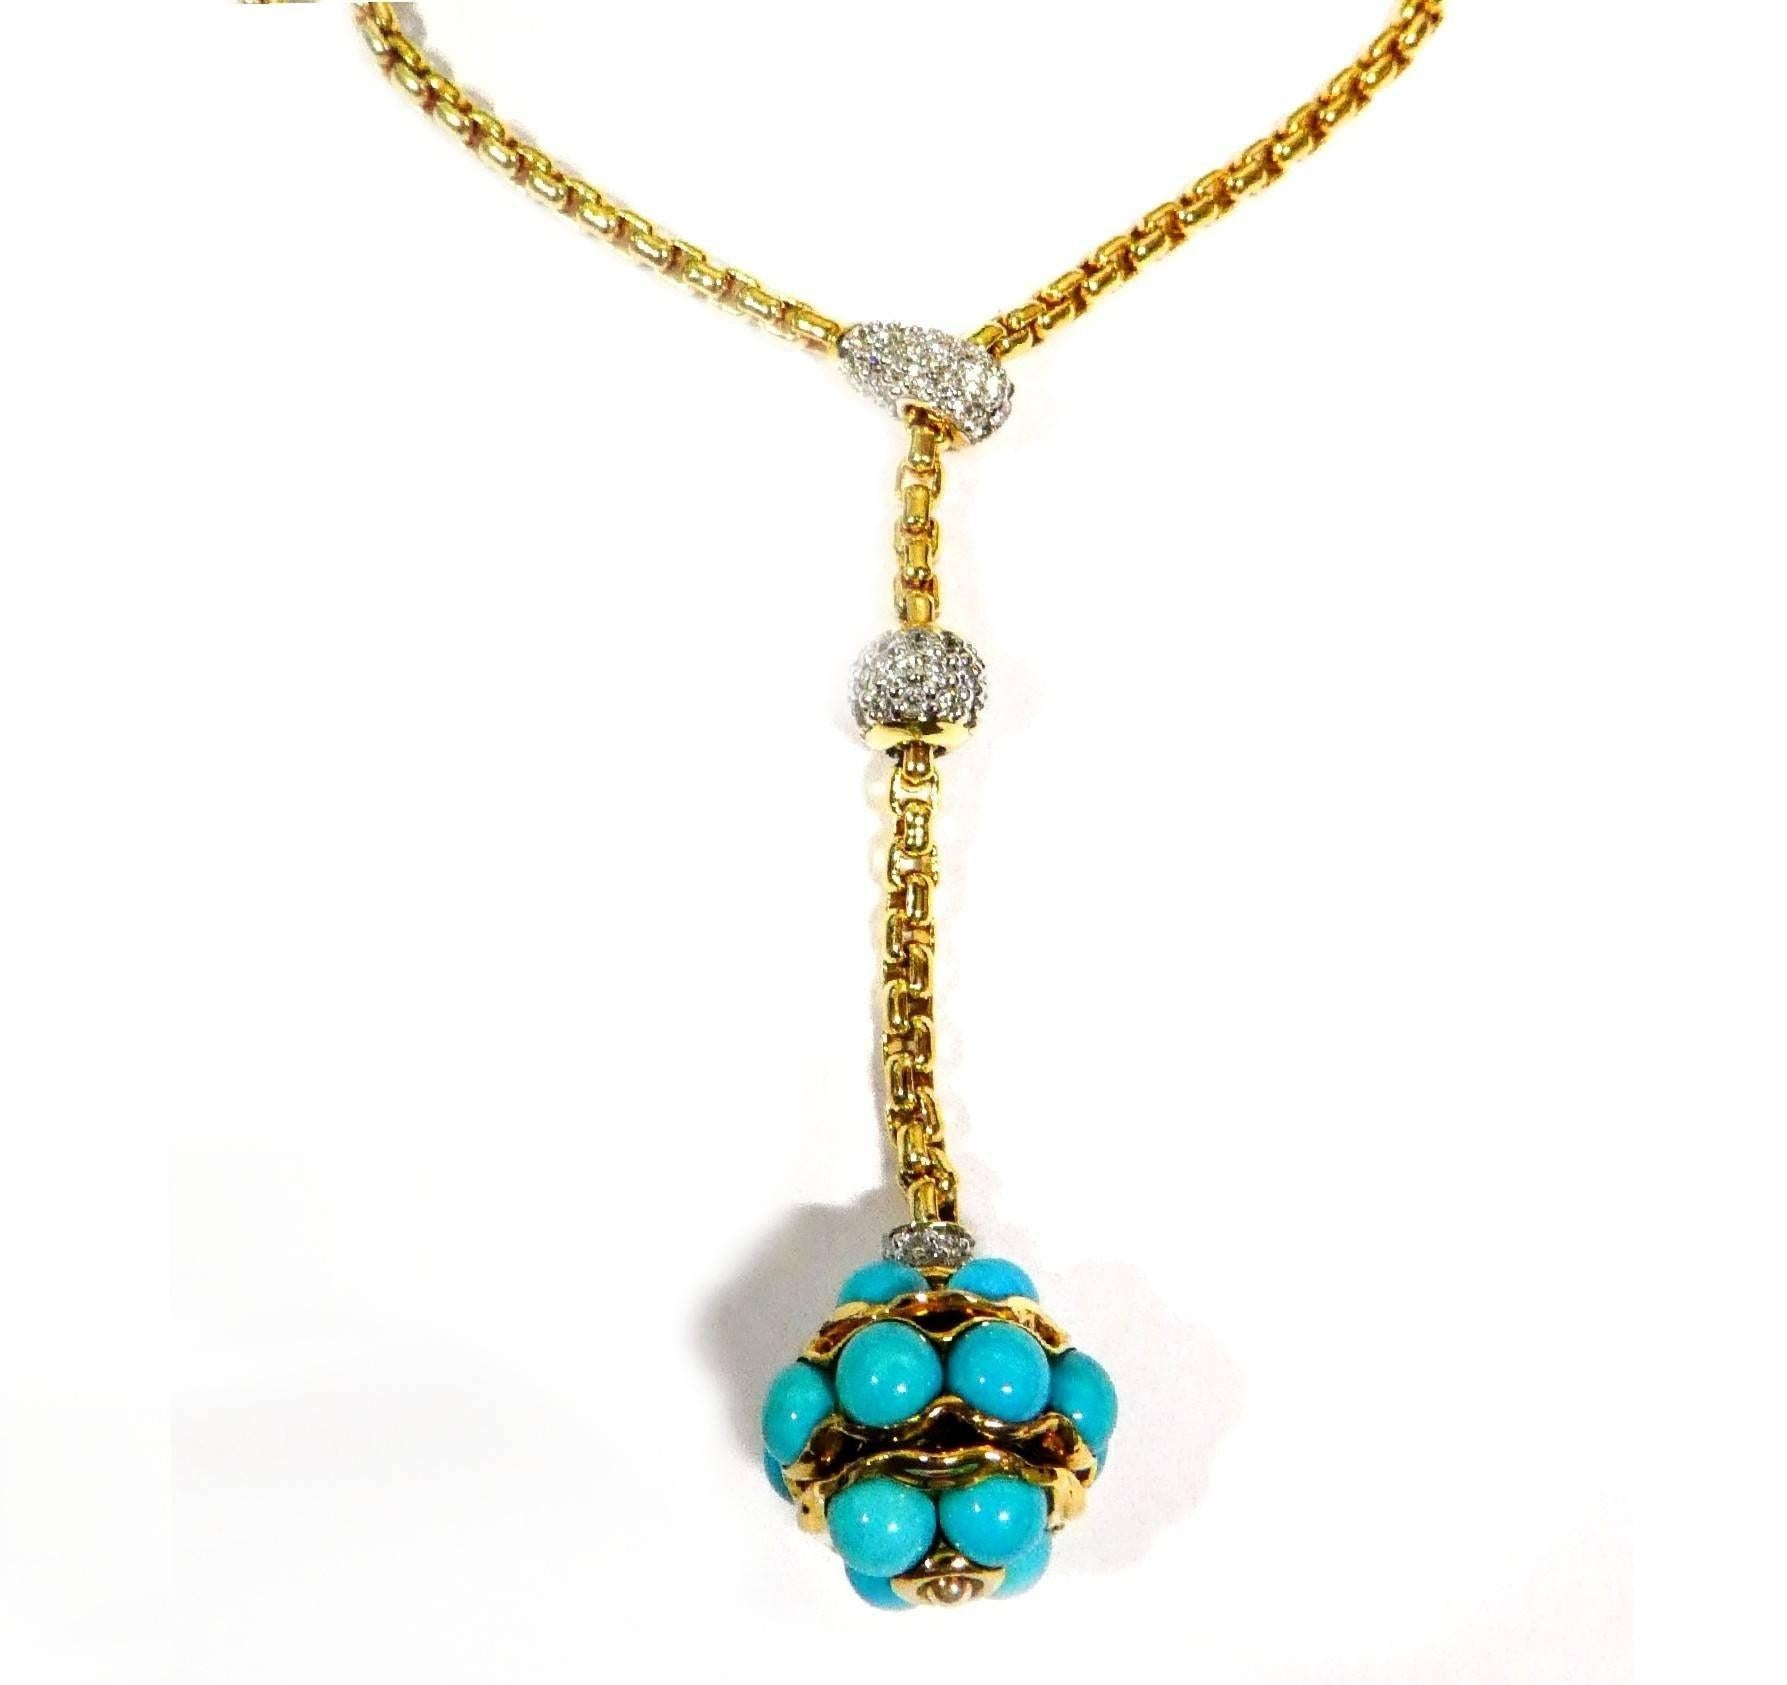 For sale is a David Yurman Lariat or Drop style Necklace with a Turquoise Ball Pendant set in 18K Yellow Gold Diamond. This necklace is adjustable in length using a slide at the Y of the neck. It contains approx. 0.28 CTW in round brilliant cut